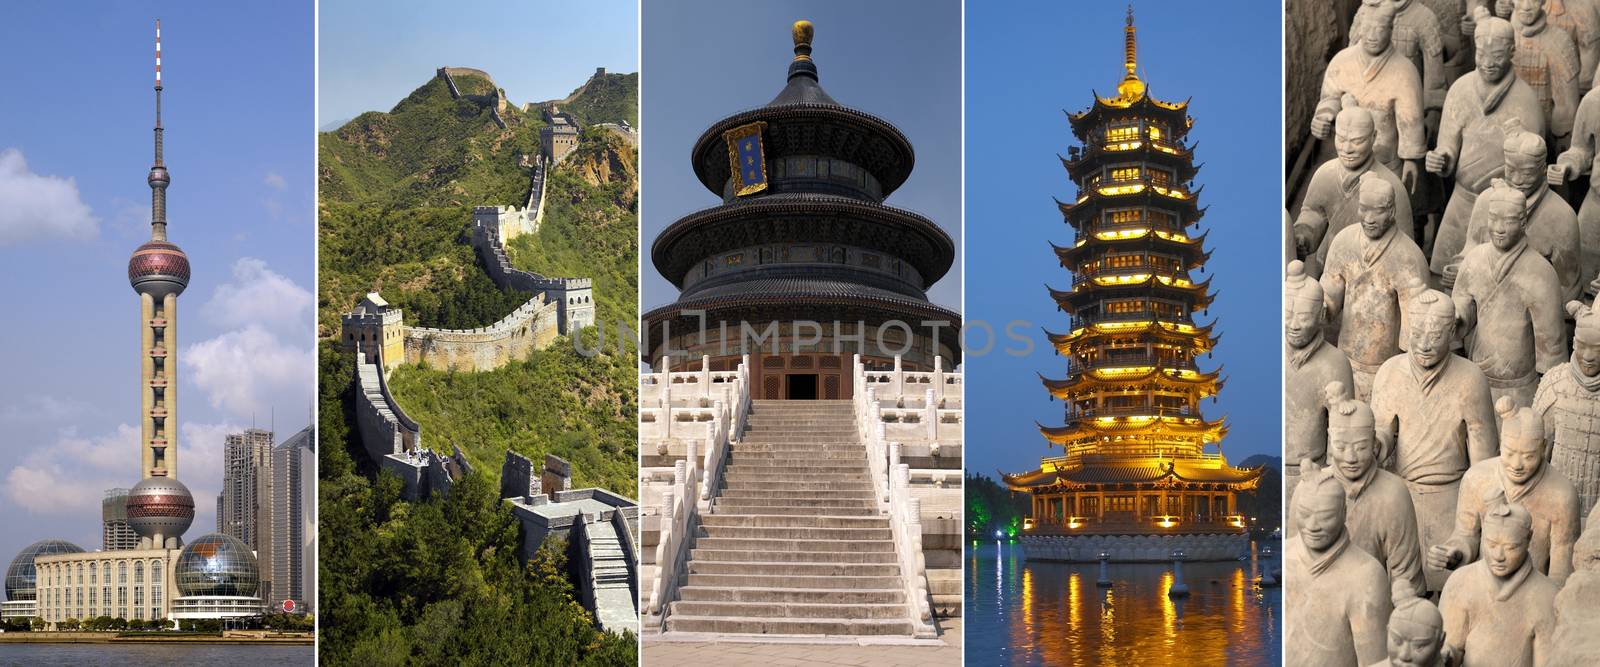 China - Shanghai, The Great Wall, Forbidden City in Beijing, Guilin Pagoda and the Terracotta Army in Xian.